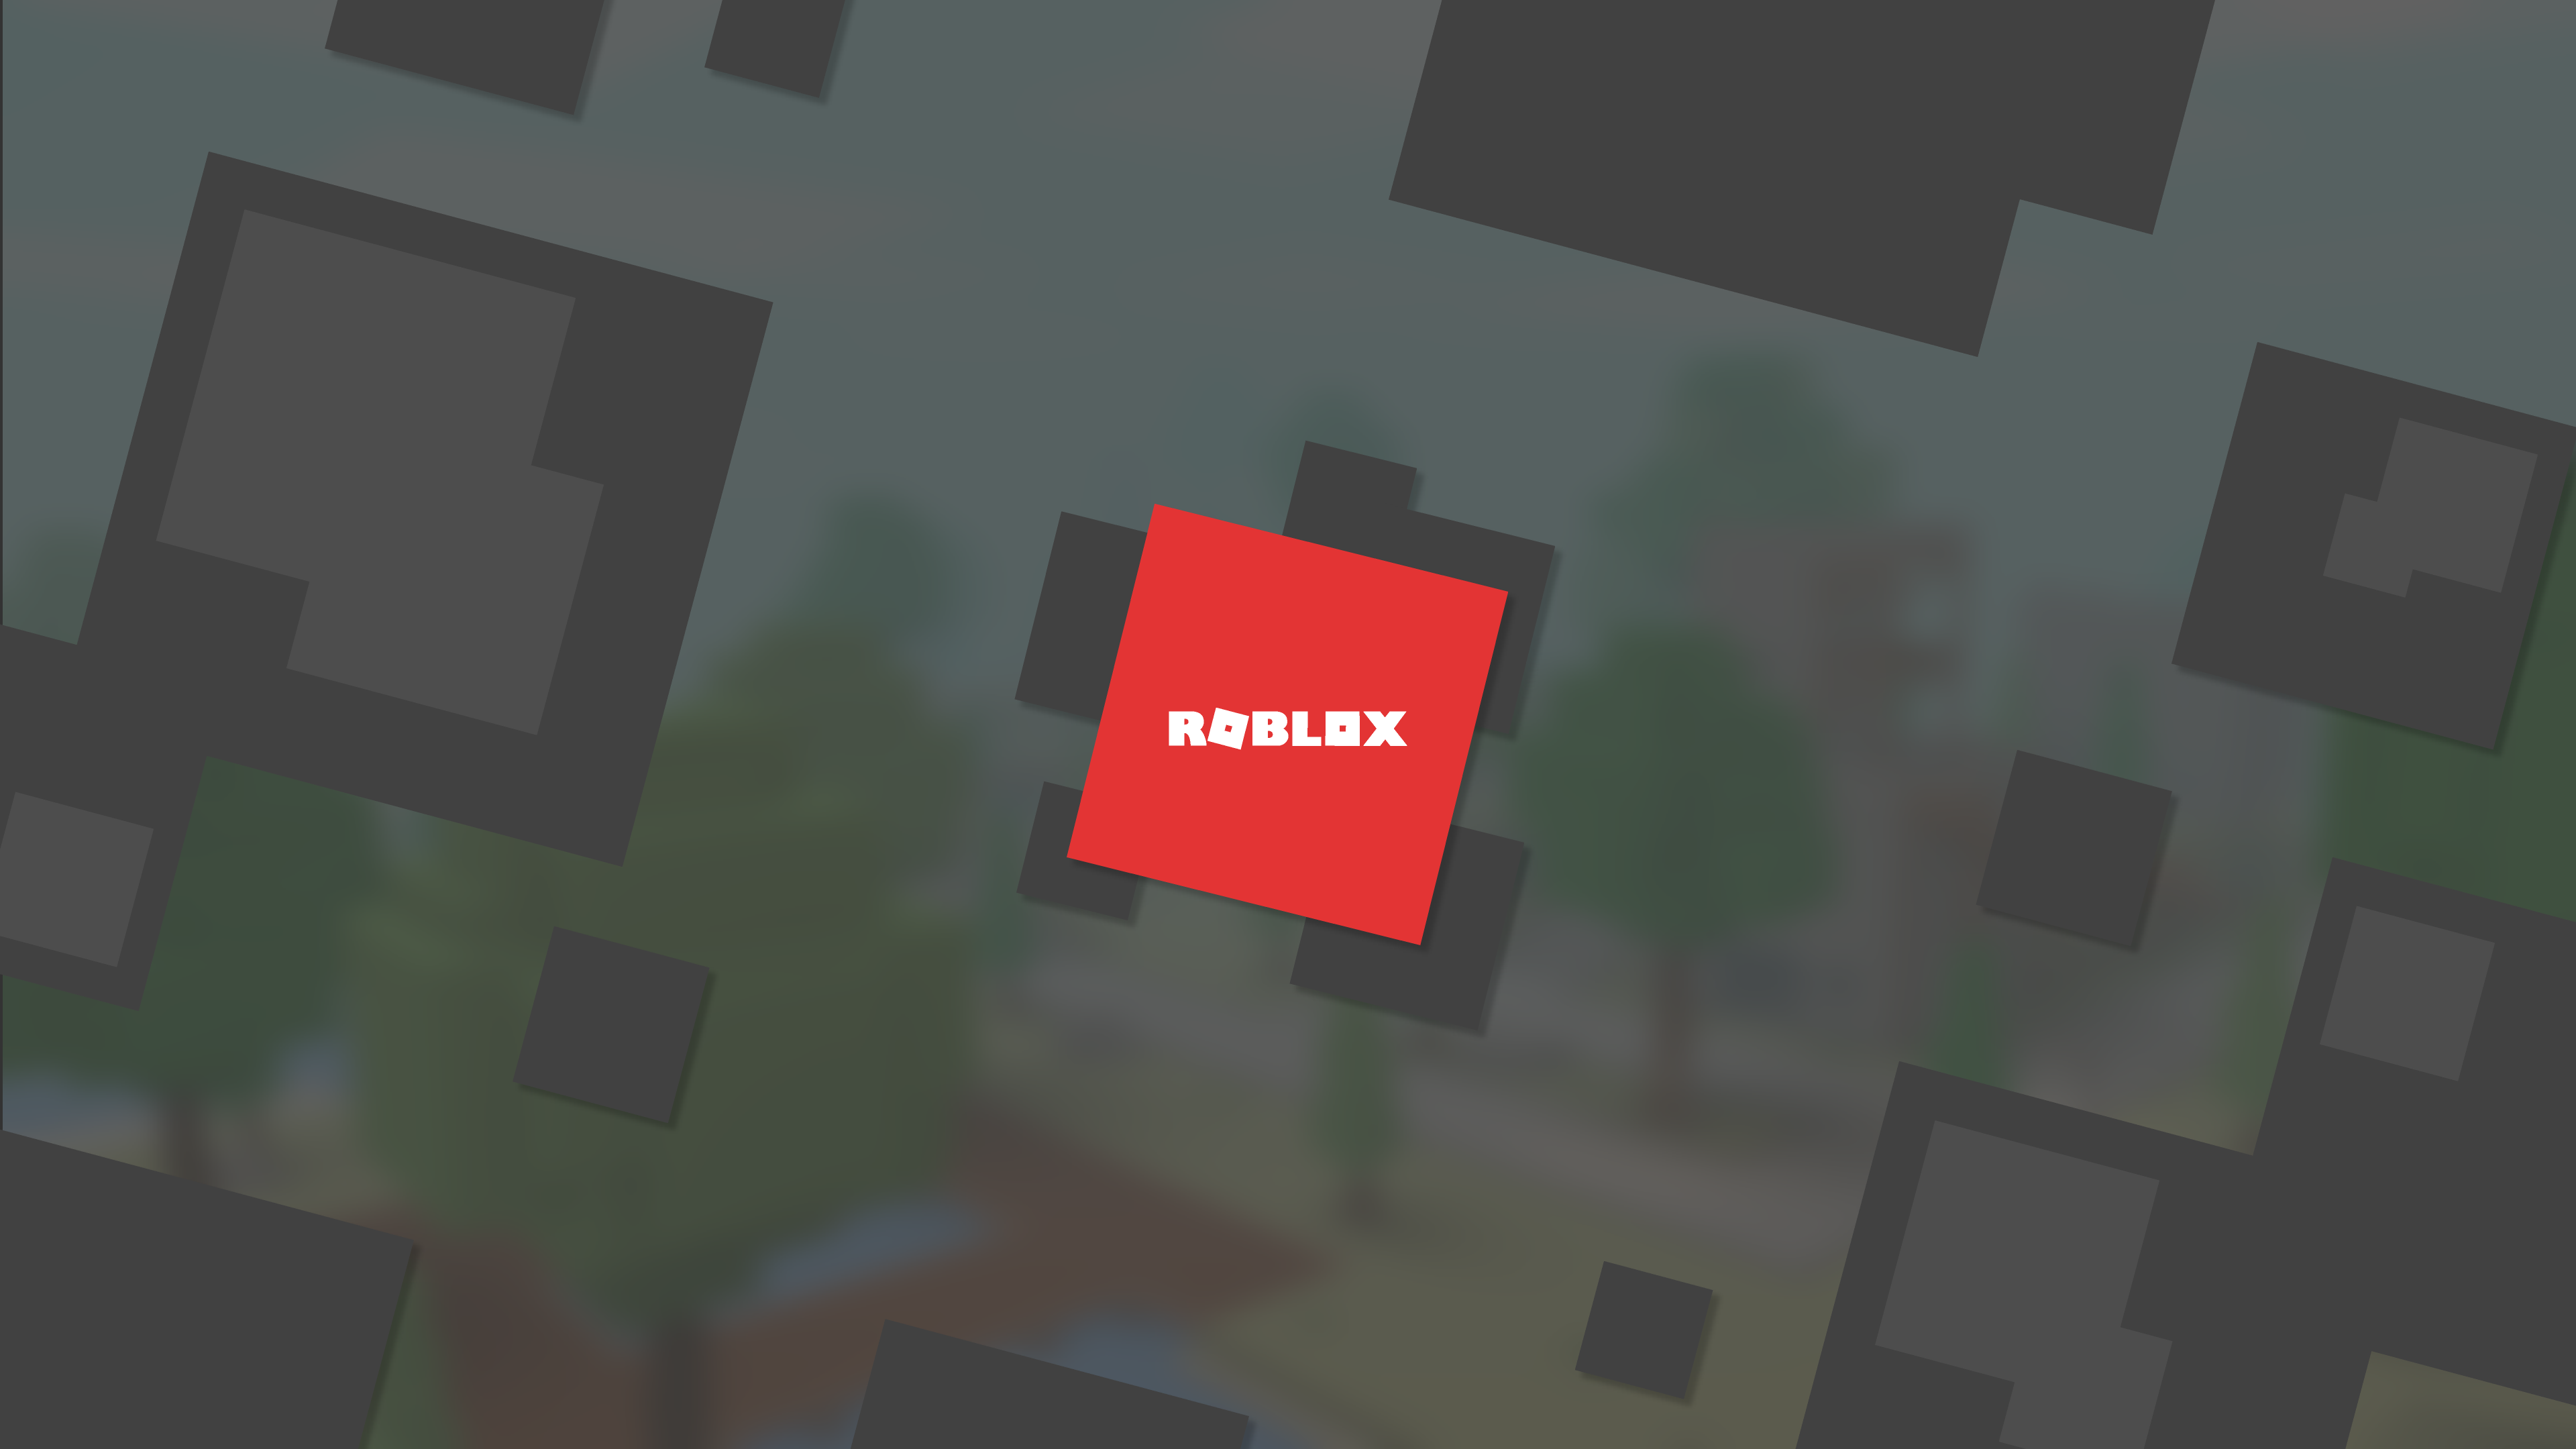 Roblox Live Wallpapers 4K & HD